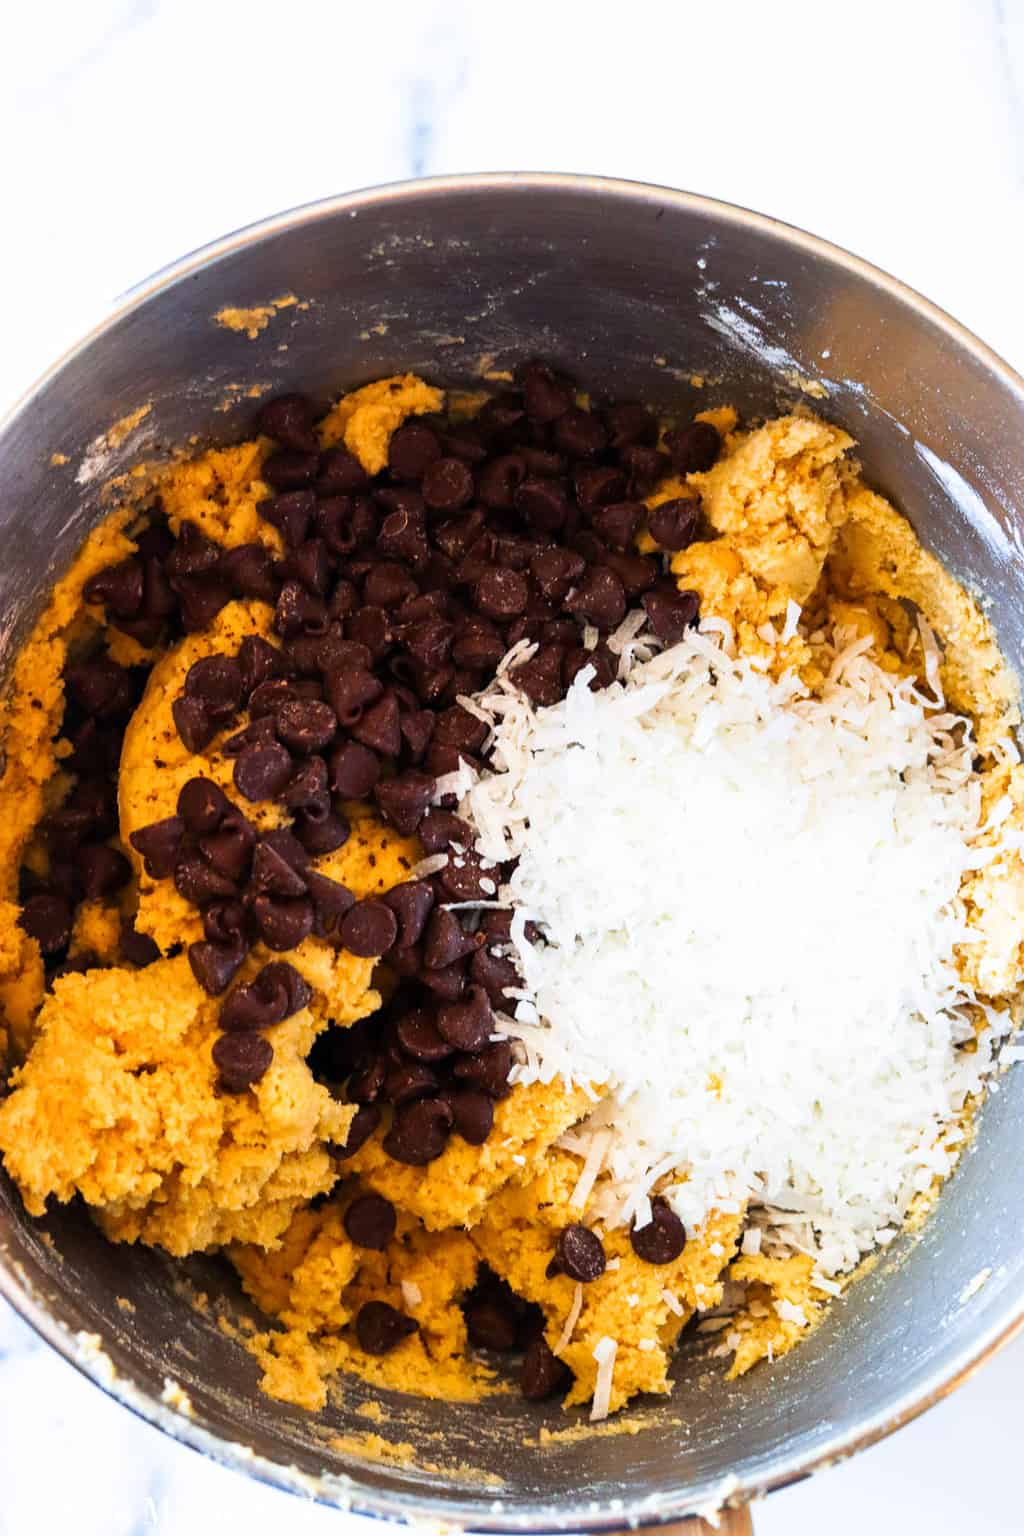 A mixing bowl of cookie dough with chocolate chips and coconut